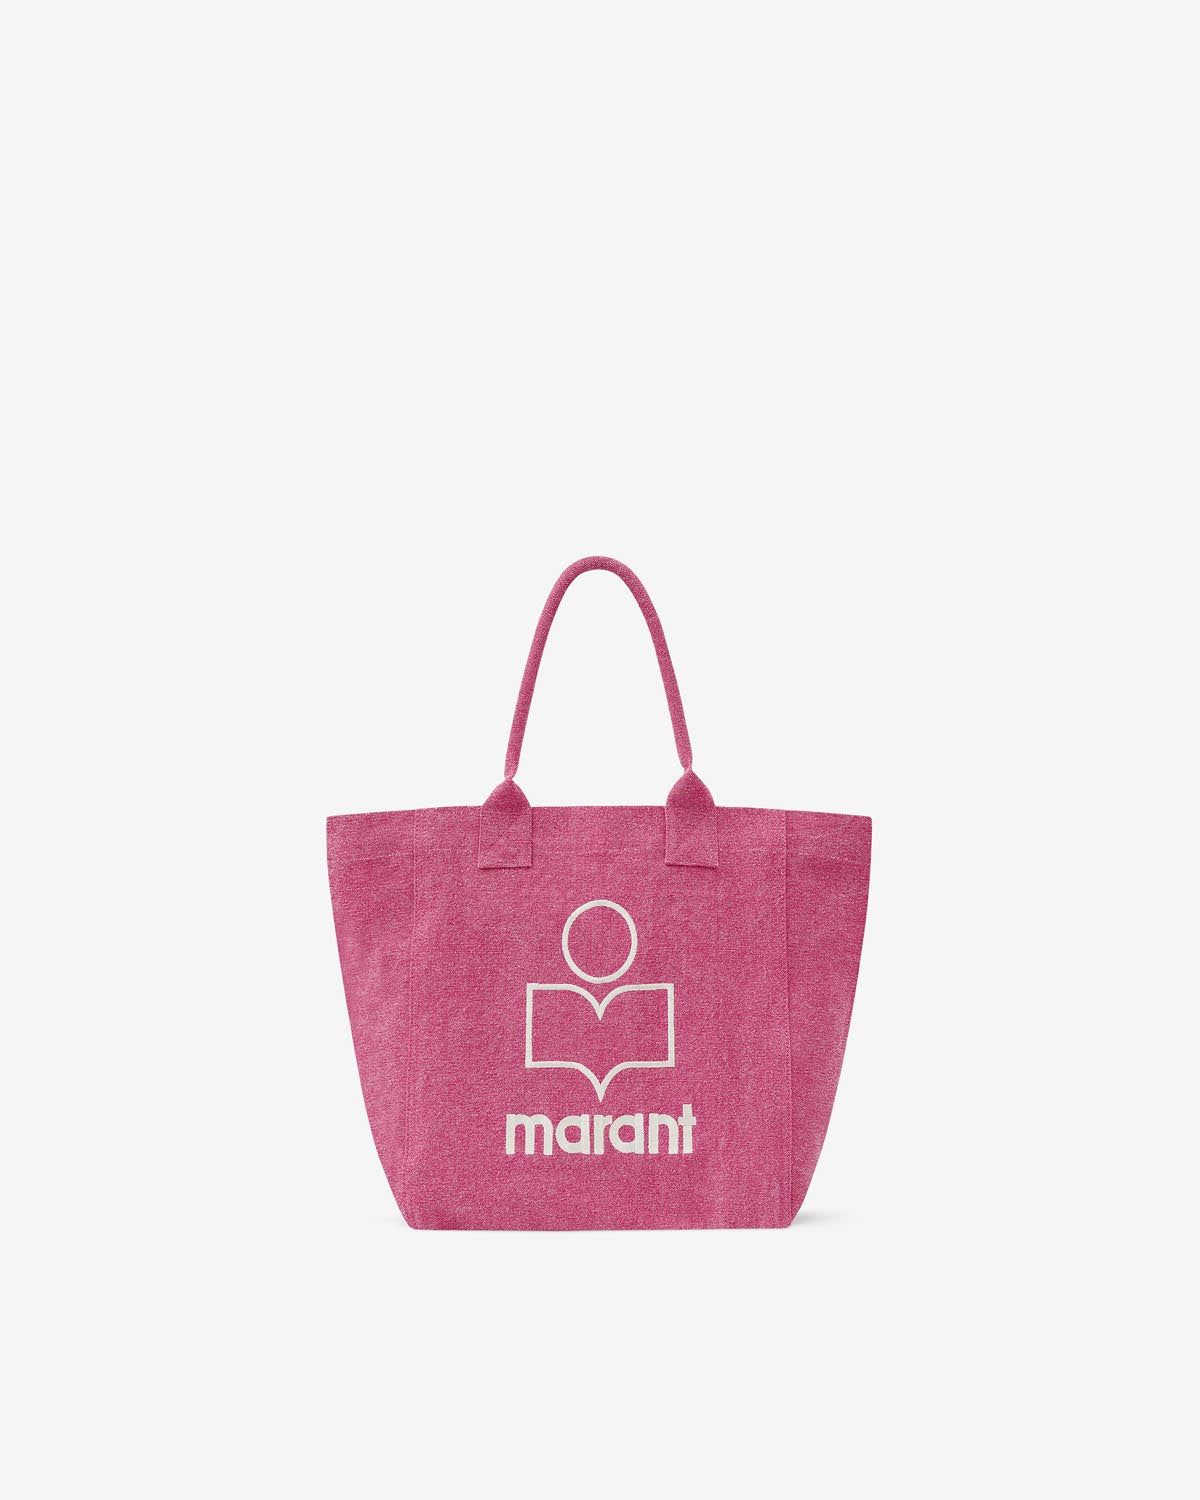 Tote bag yenky small Woman Rosa 12